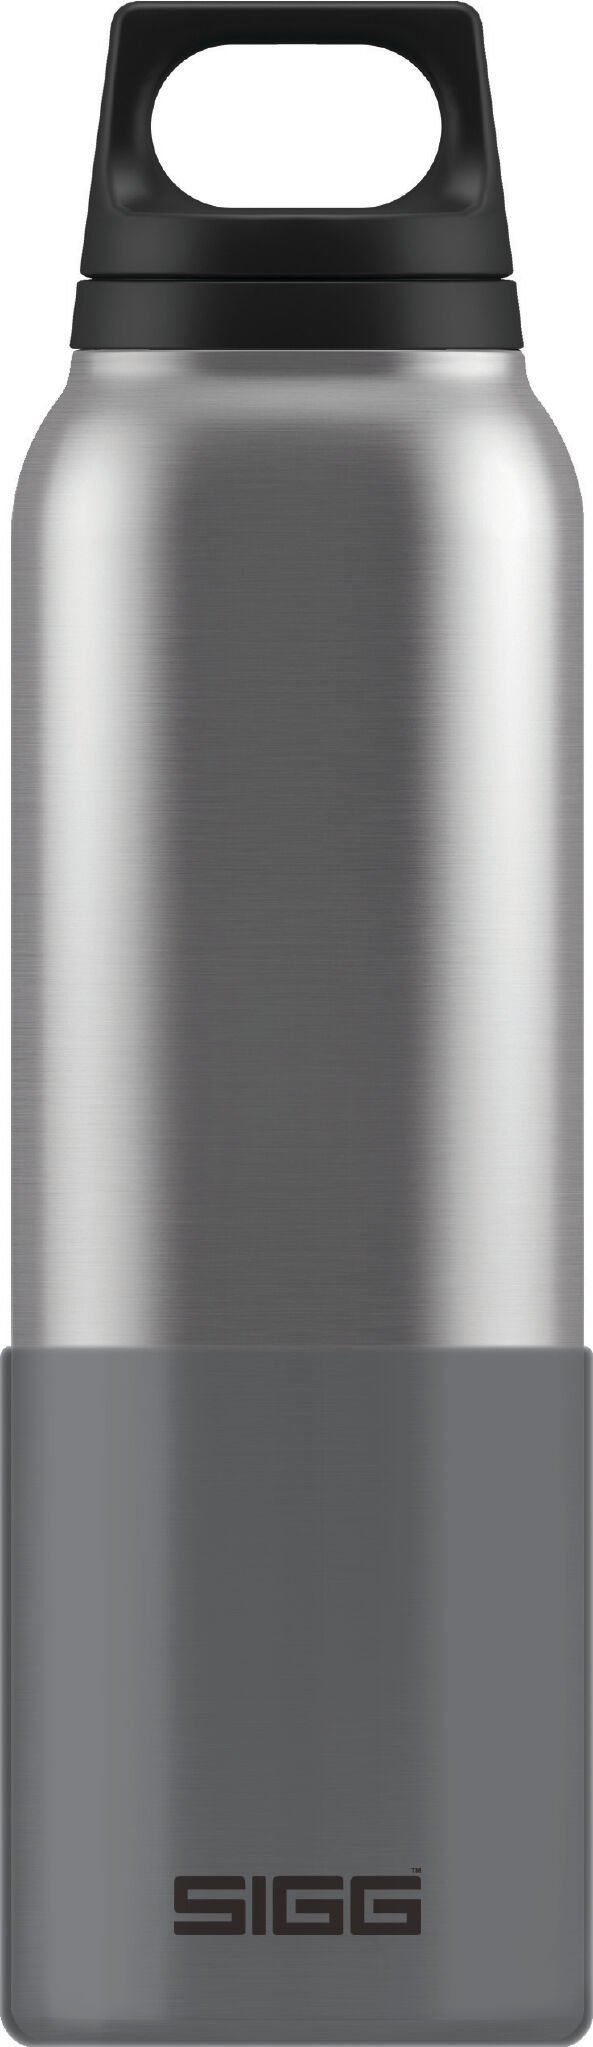 Sigg Hot & Cold 0.5L Avec Cup - Isolierflasche